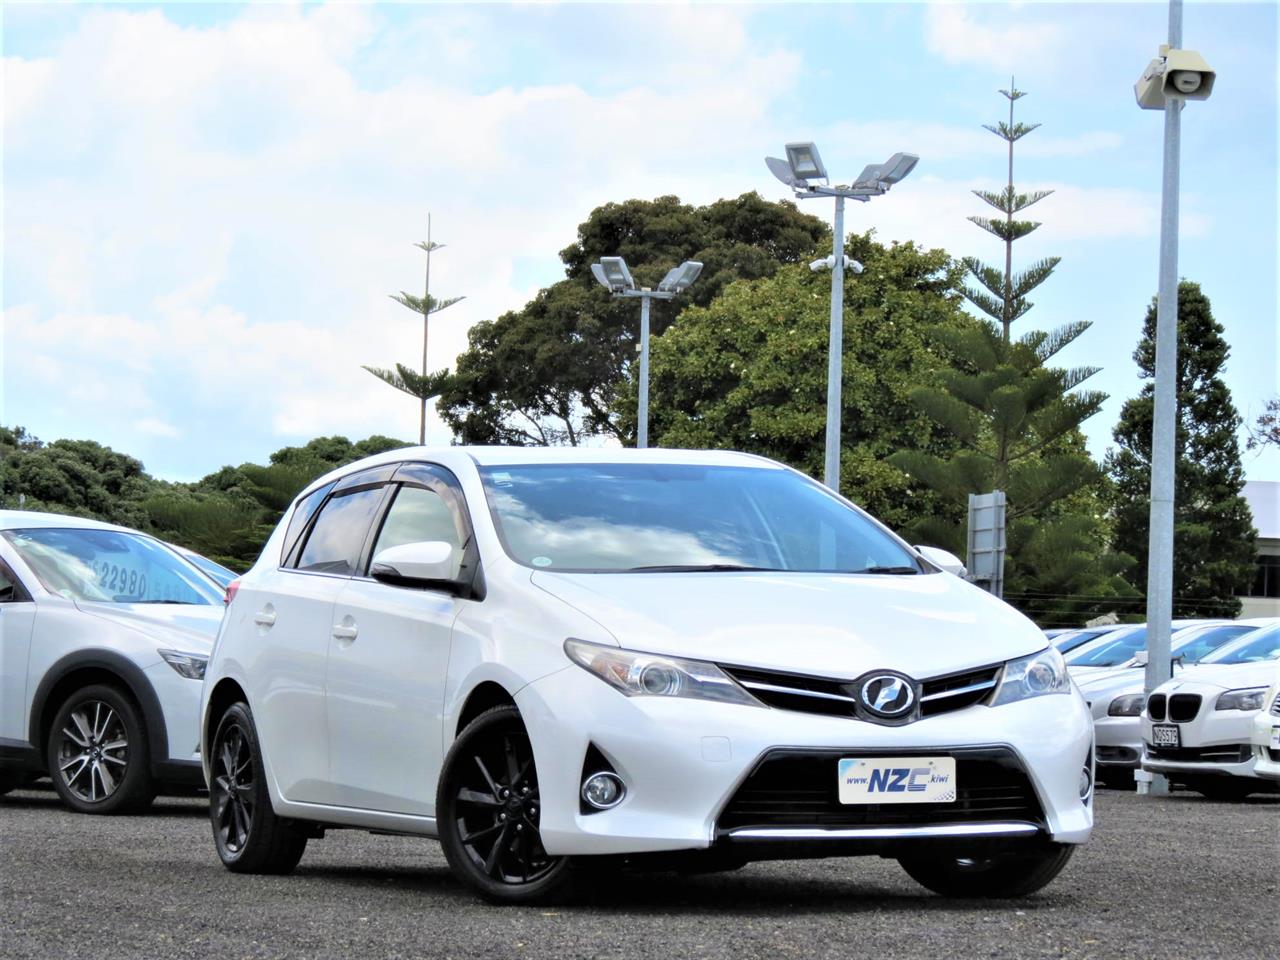 NZC 2013 Toyota Auris just arrived to Auckland